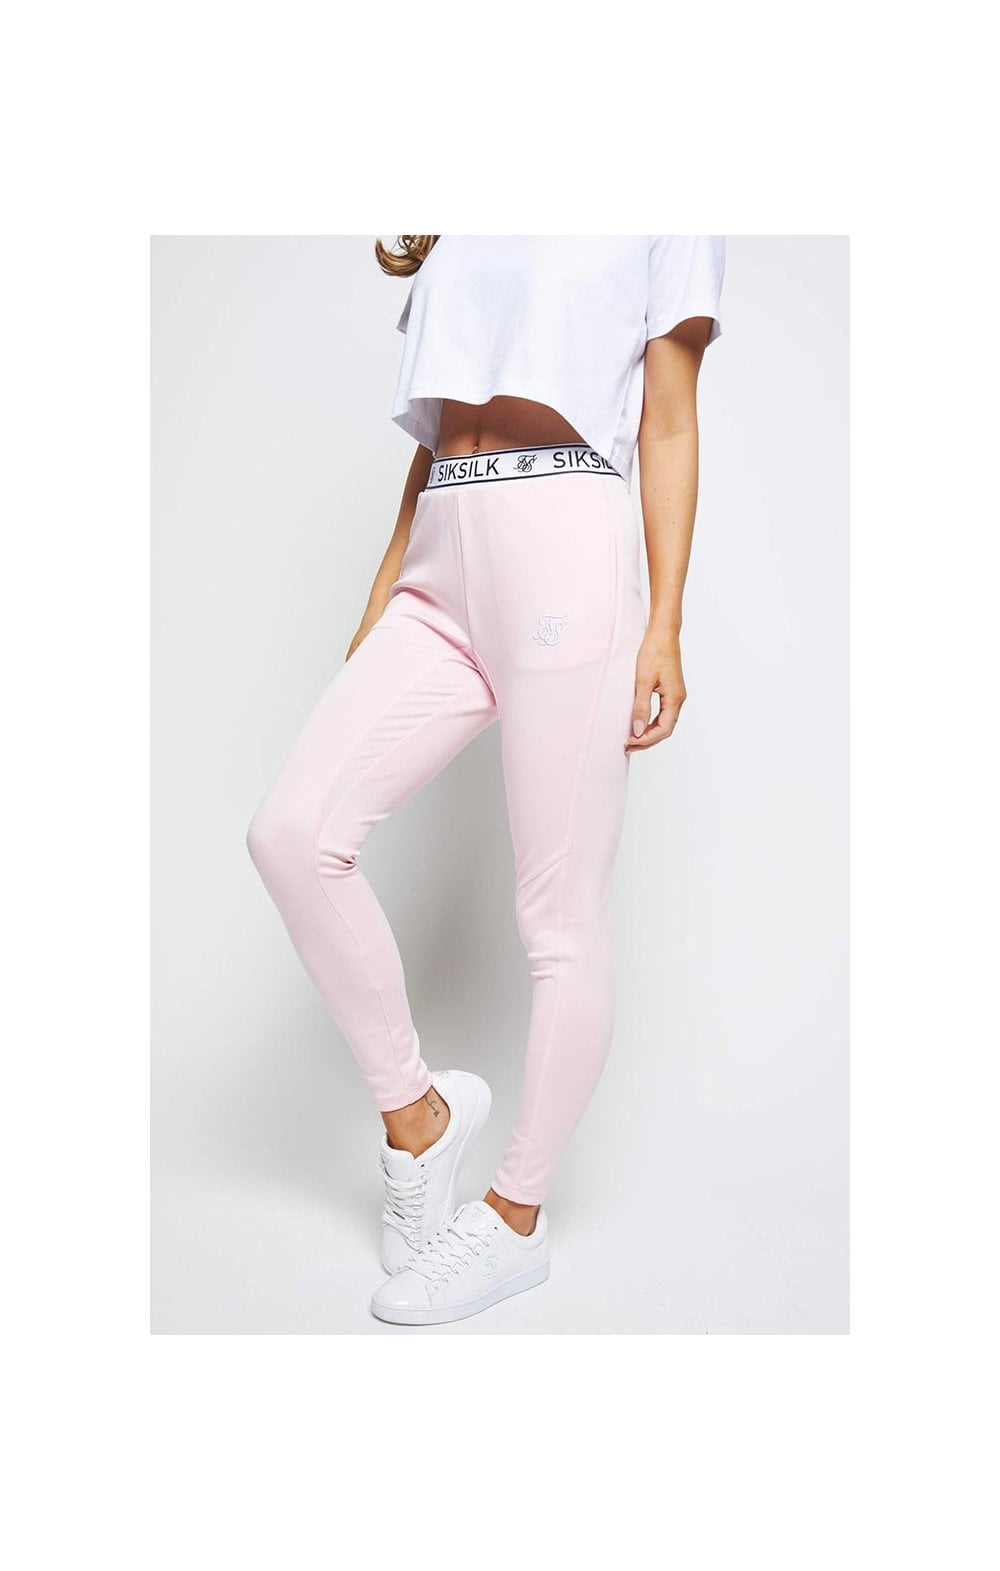 Load image into Gallery viewer, SikSilk Tape Athlete Pants – Pink